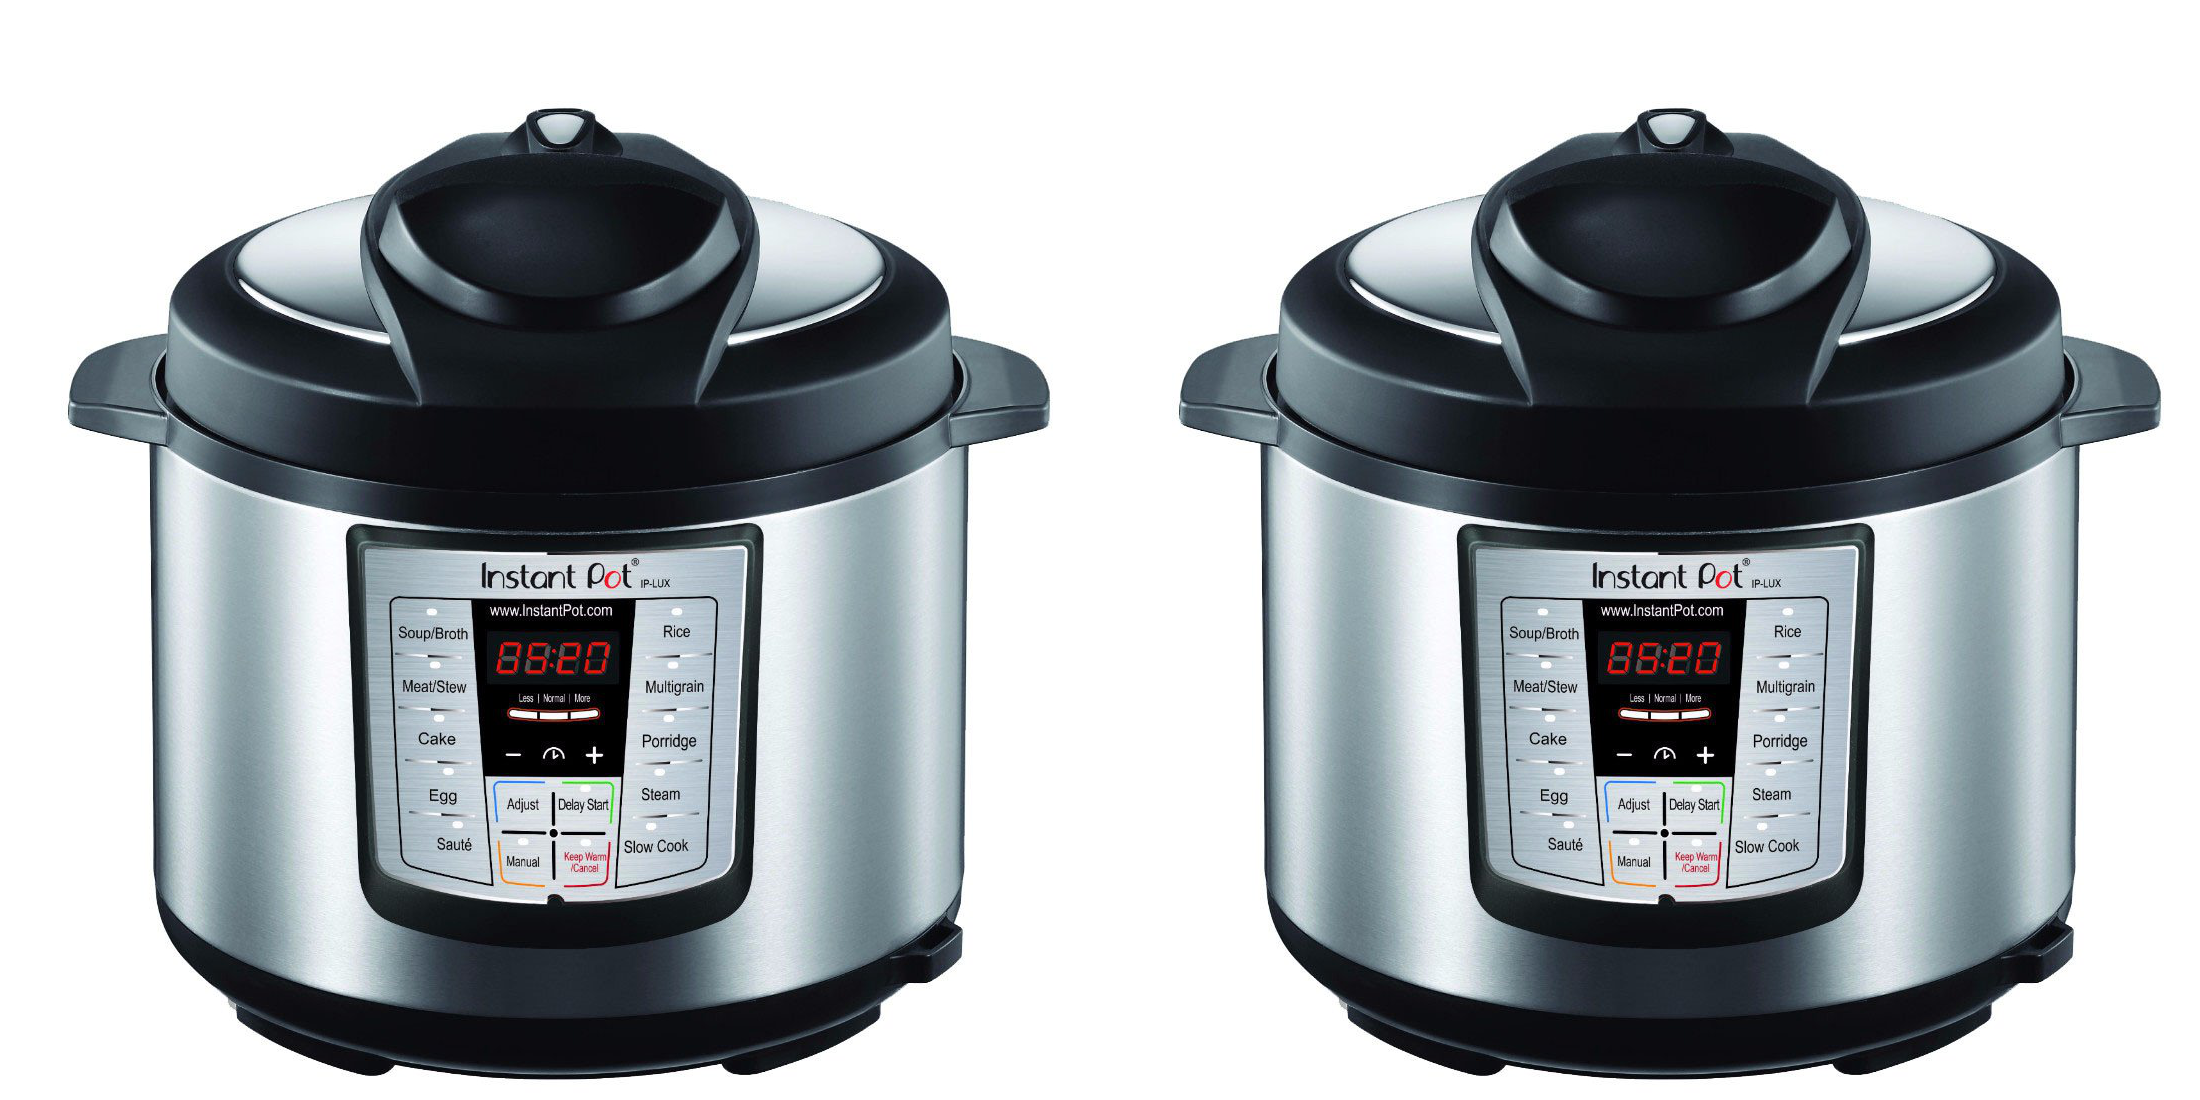 https://9to5toys.com/wp-content/uploads/sites/5/2018/07/Instant-Pot-V3-6-Qt-6-in-1-Multi-Use-Programmable-Multi-Cooker.png